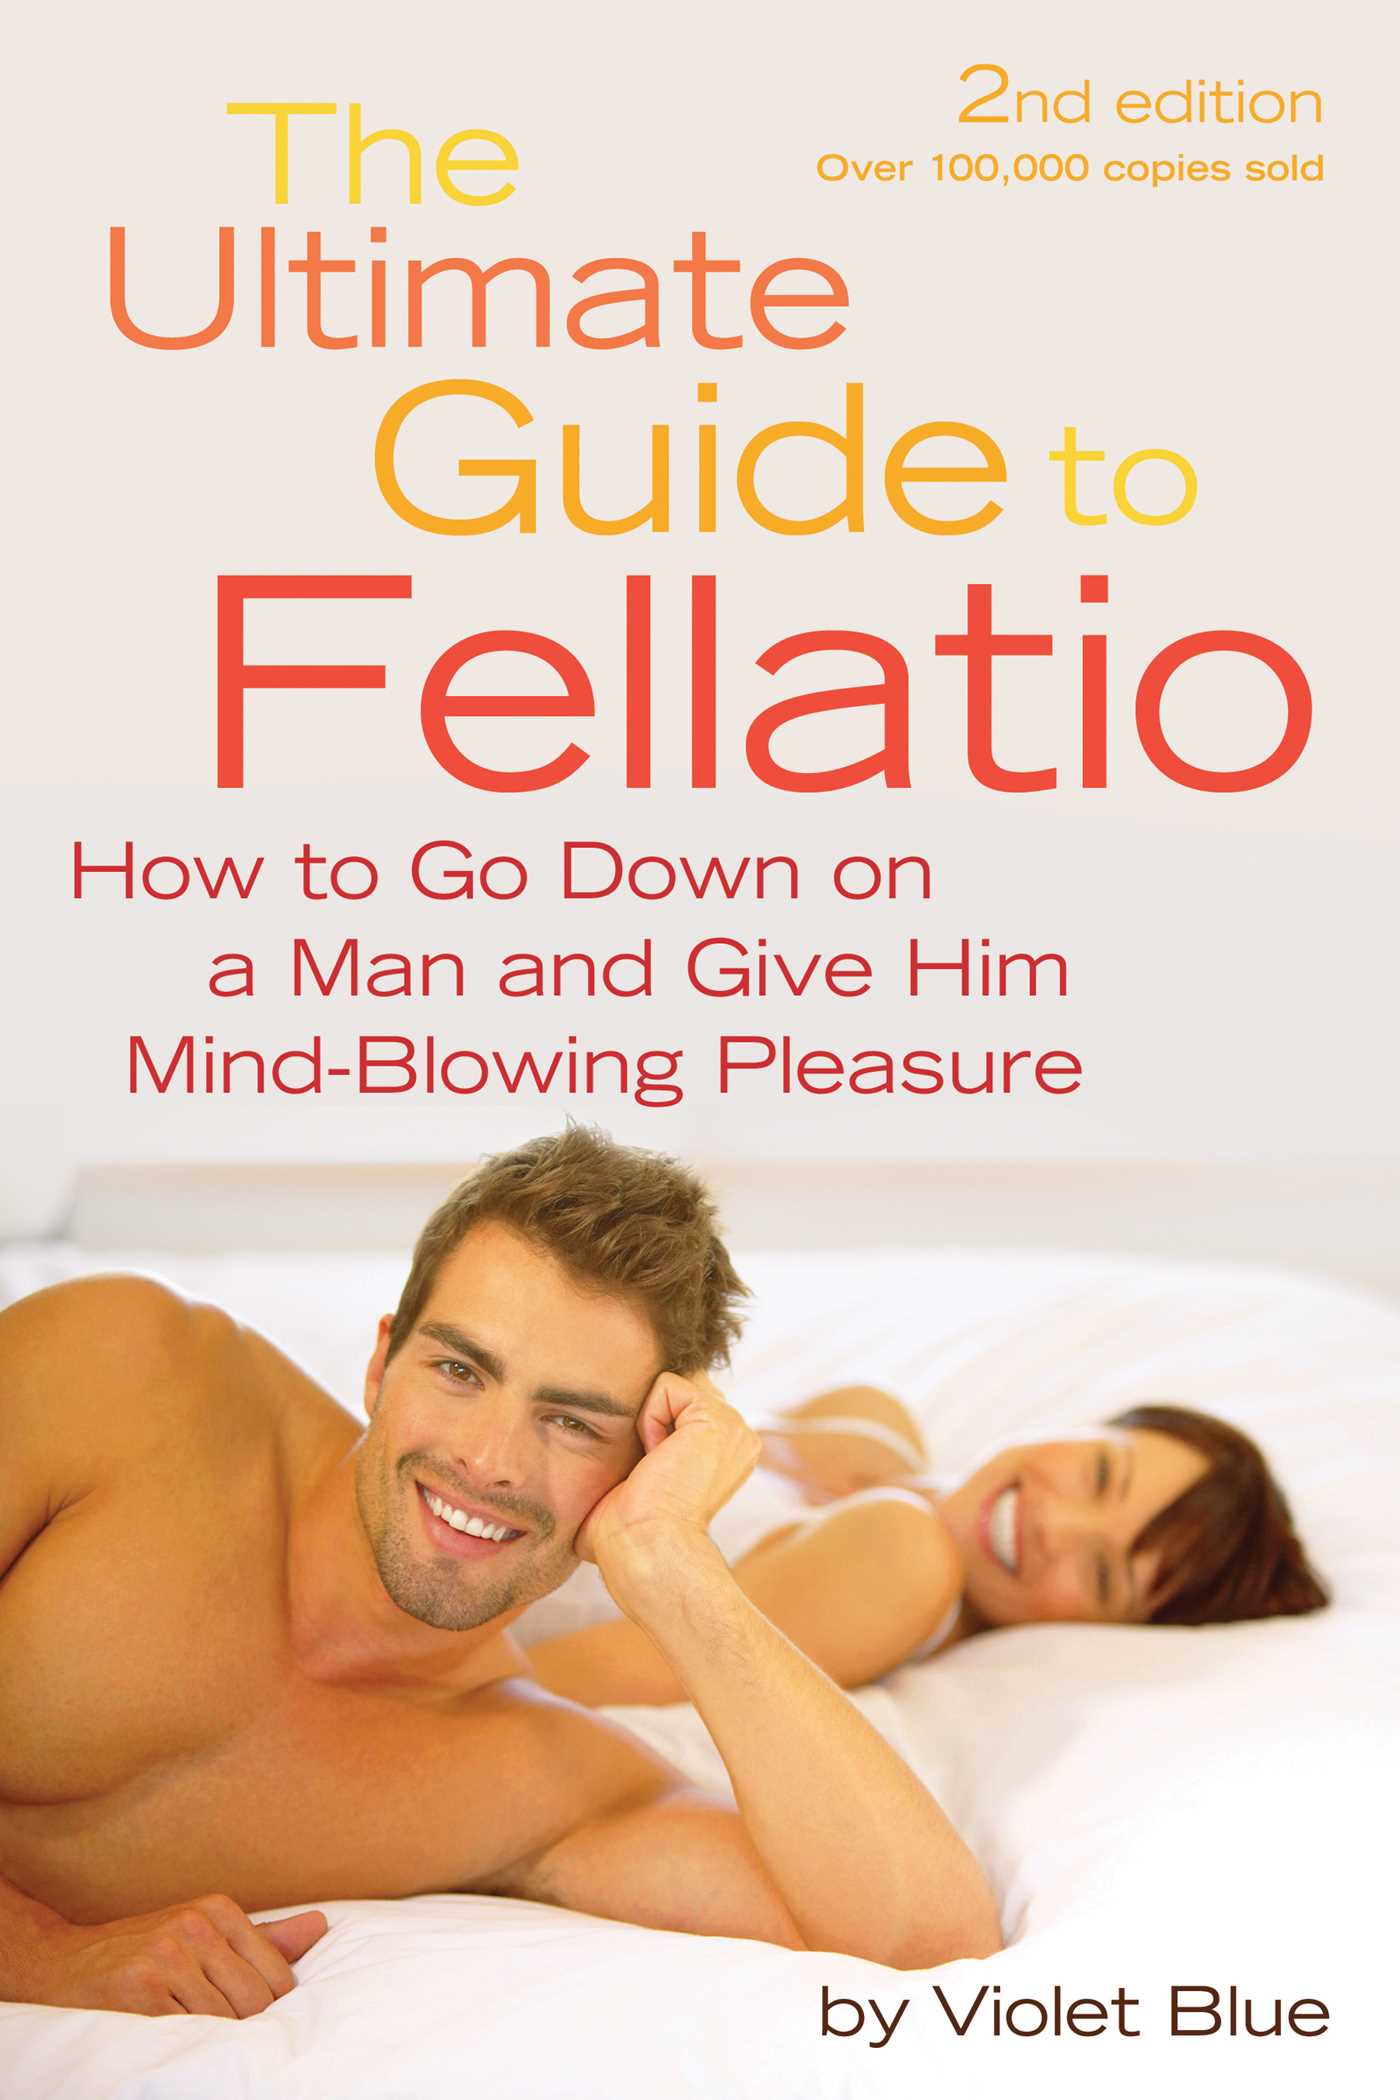 TQG: The Ultimate Guide to Mind-Blowing Sexual Experiences